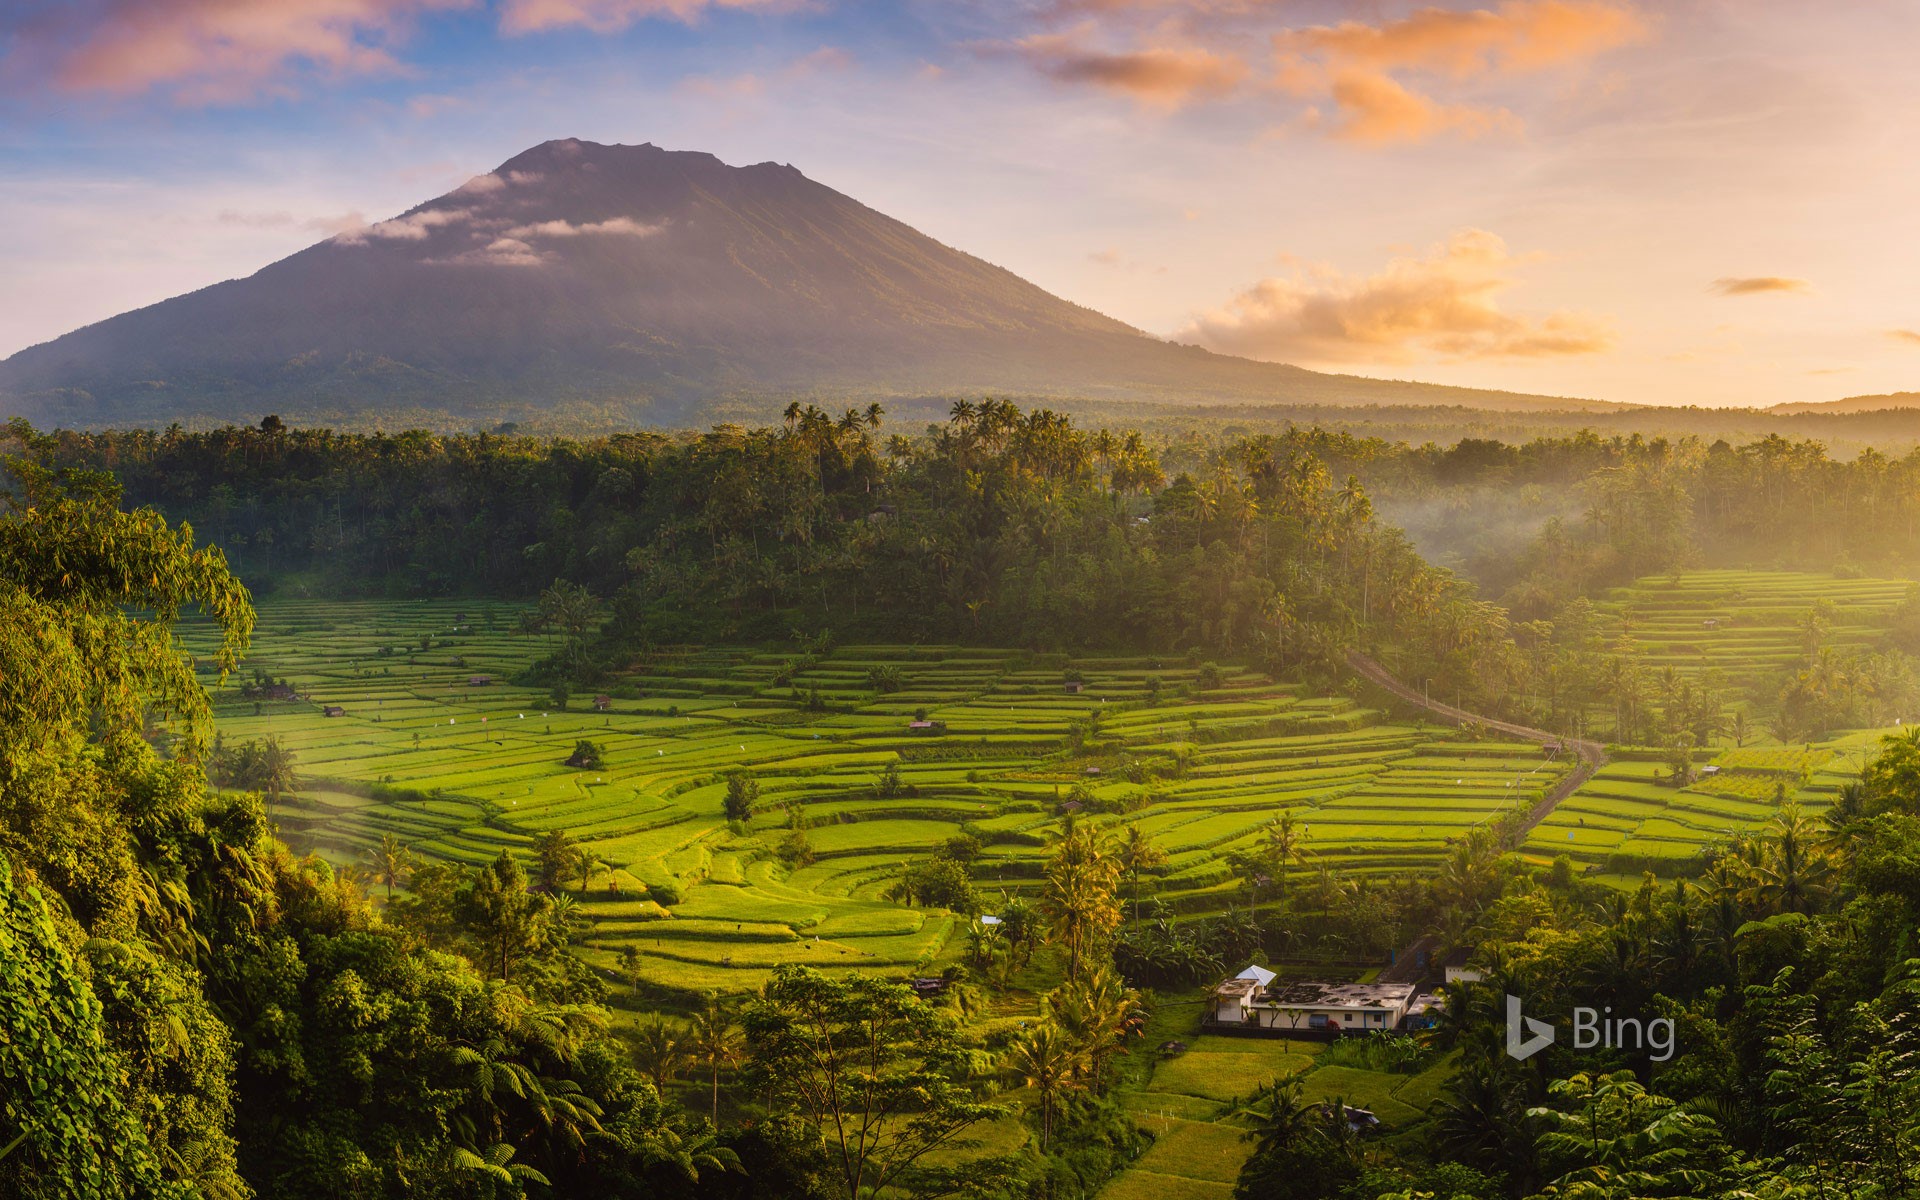 Rice fields in the Sidemen Valley with Mount Agung in the background, Bali, Indonesia